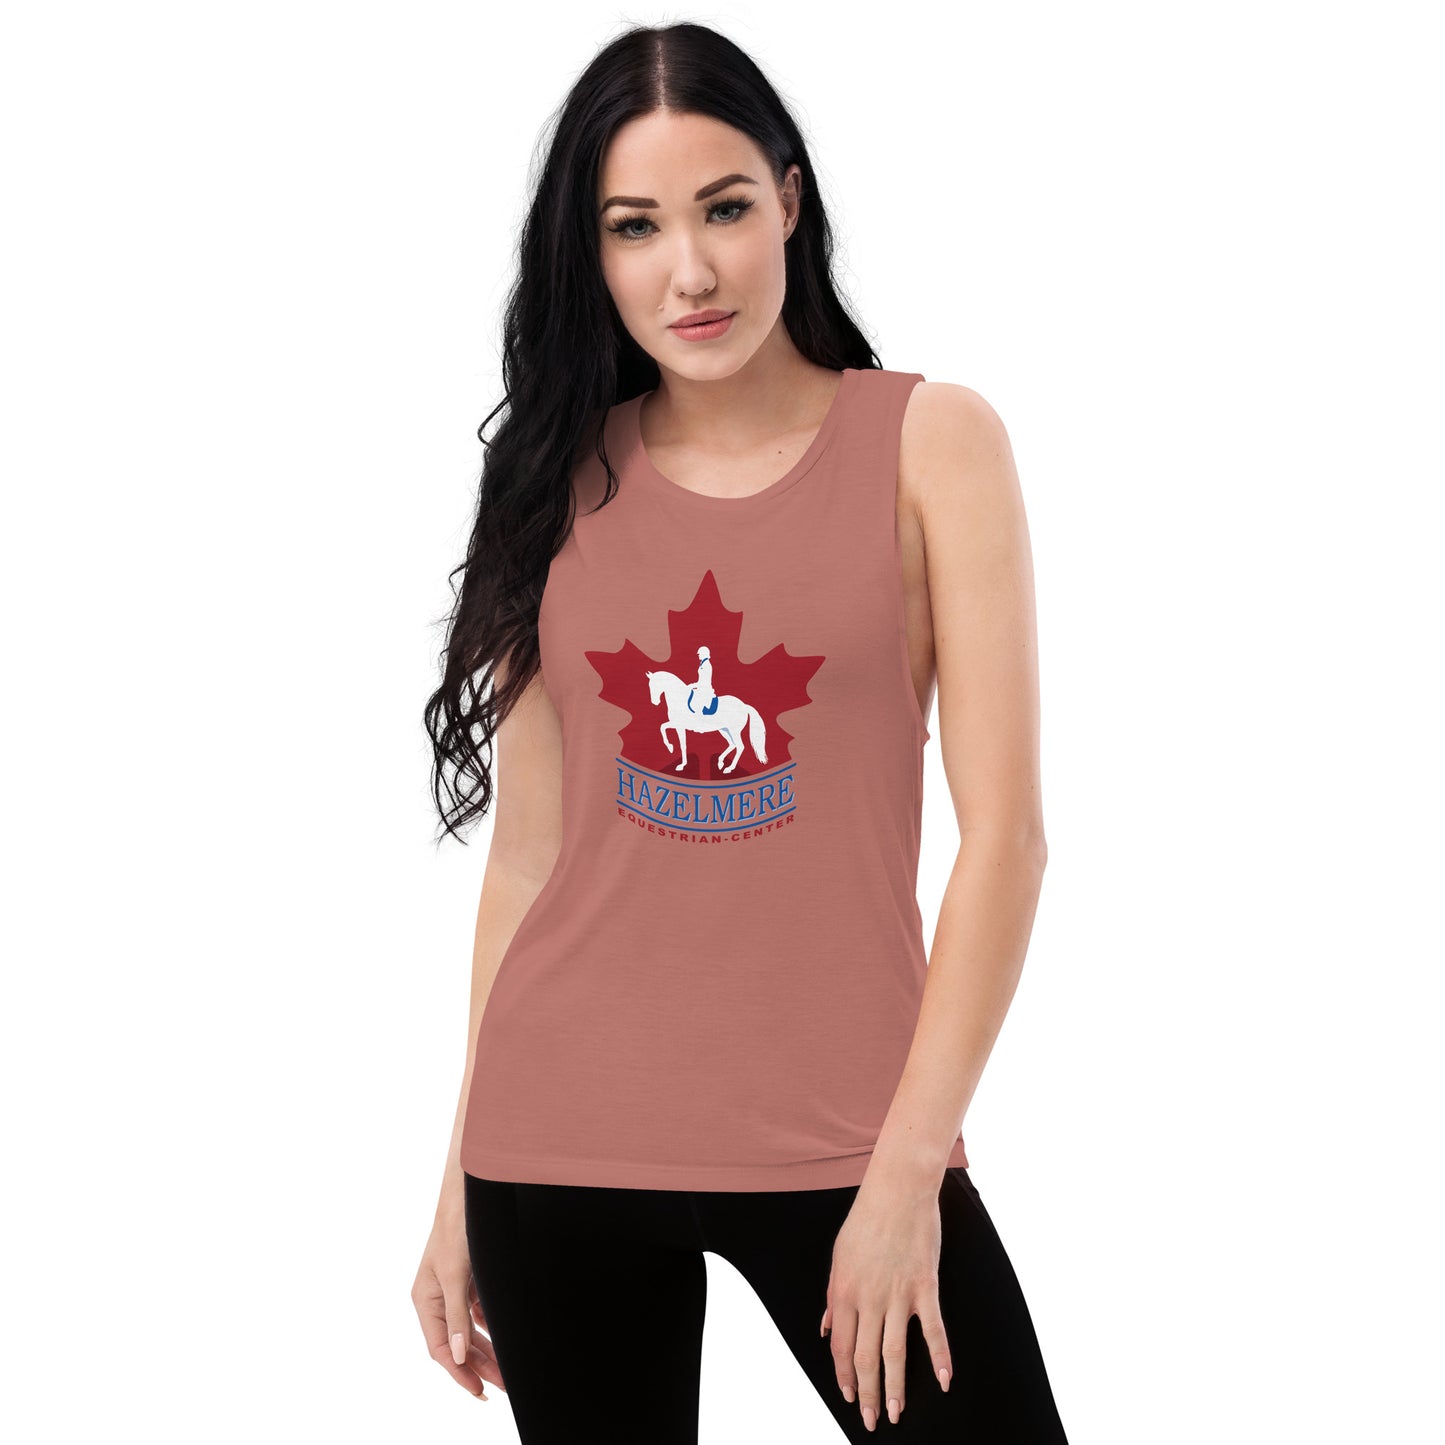 Hazelmere Equestrian Center Ladies’ Muscle Tank